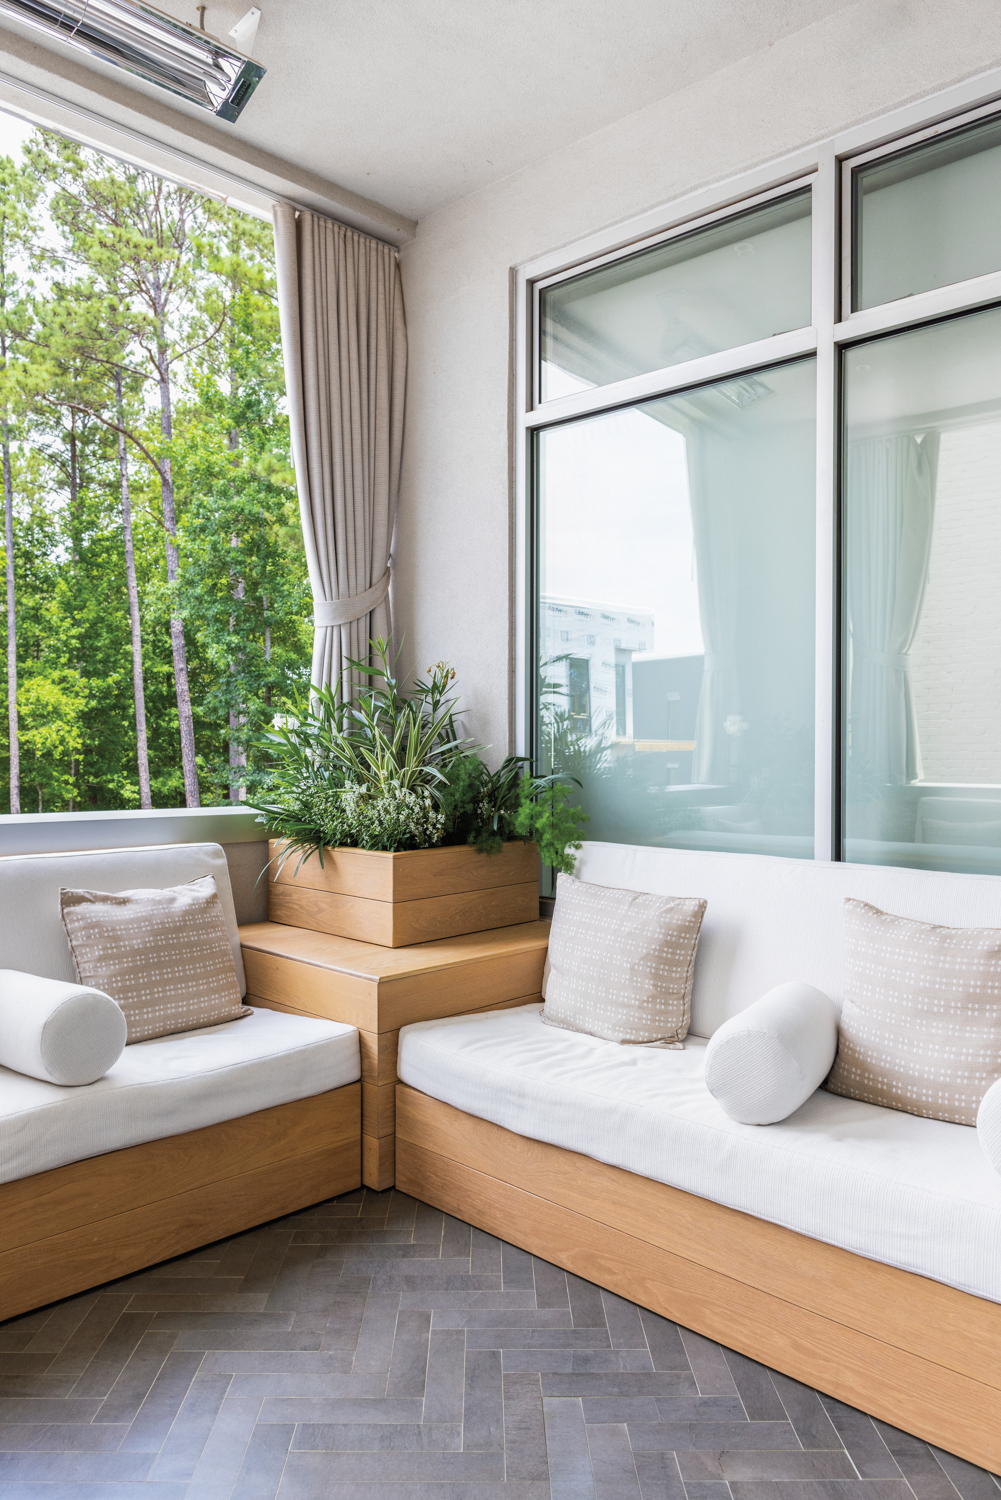 Spa at Serenbe balcony with L-shaped benches, white cushions and tan throw pillows